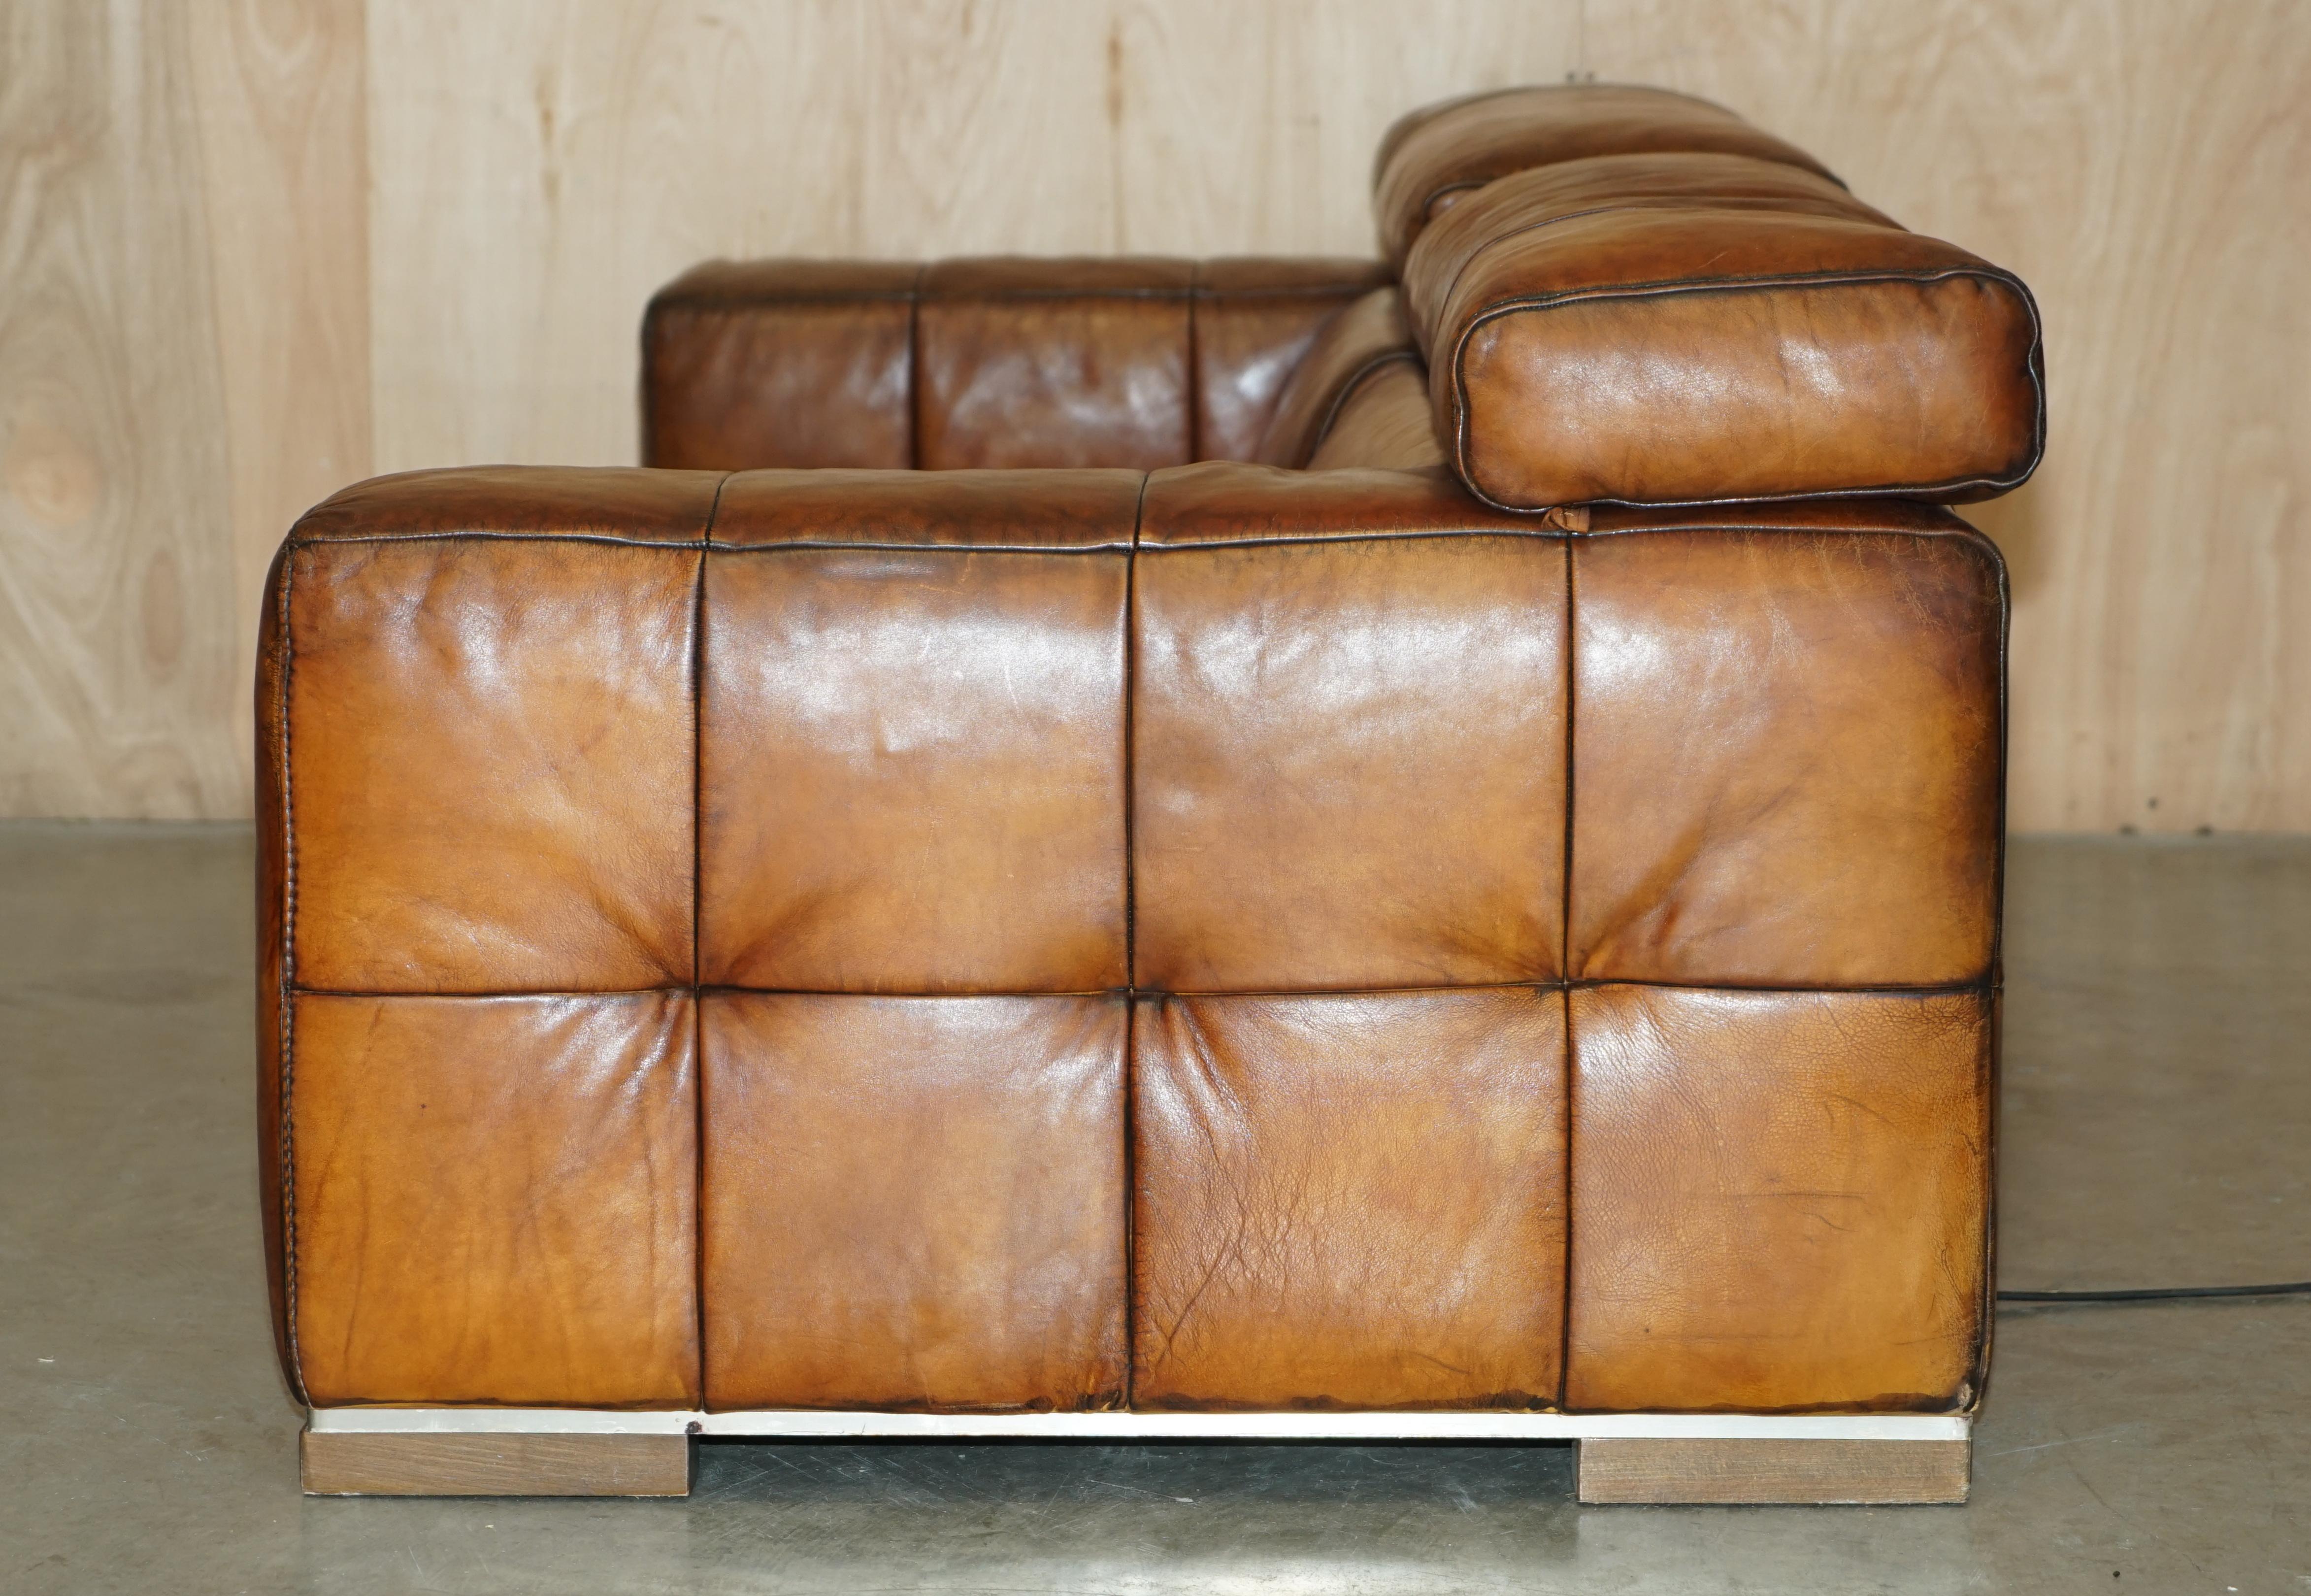 Natuzzi Roma Cigar Brown Leather Sofa Electric Raising Headrest Part of a Suite For Sale 6